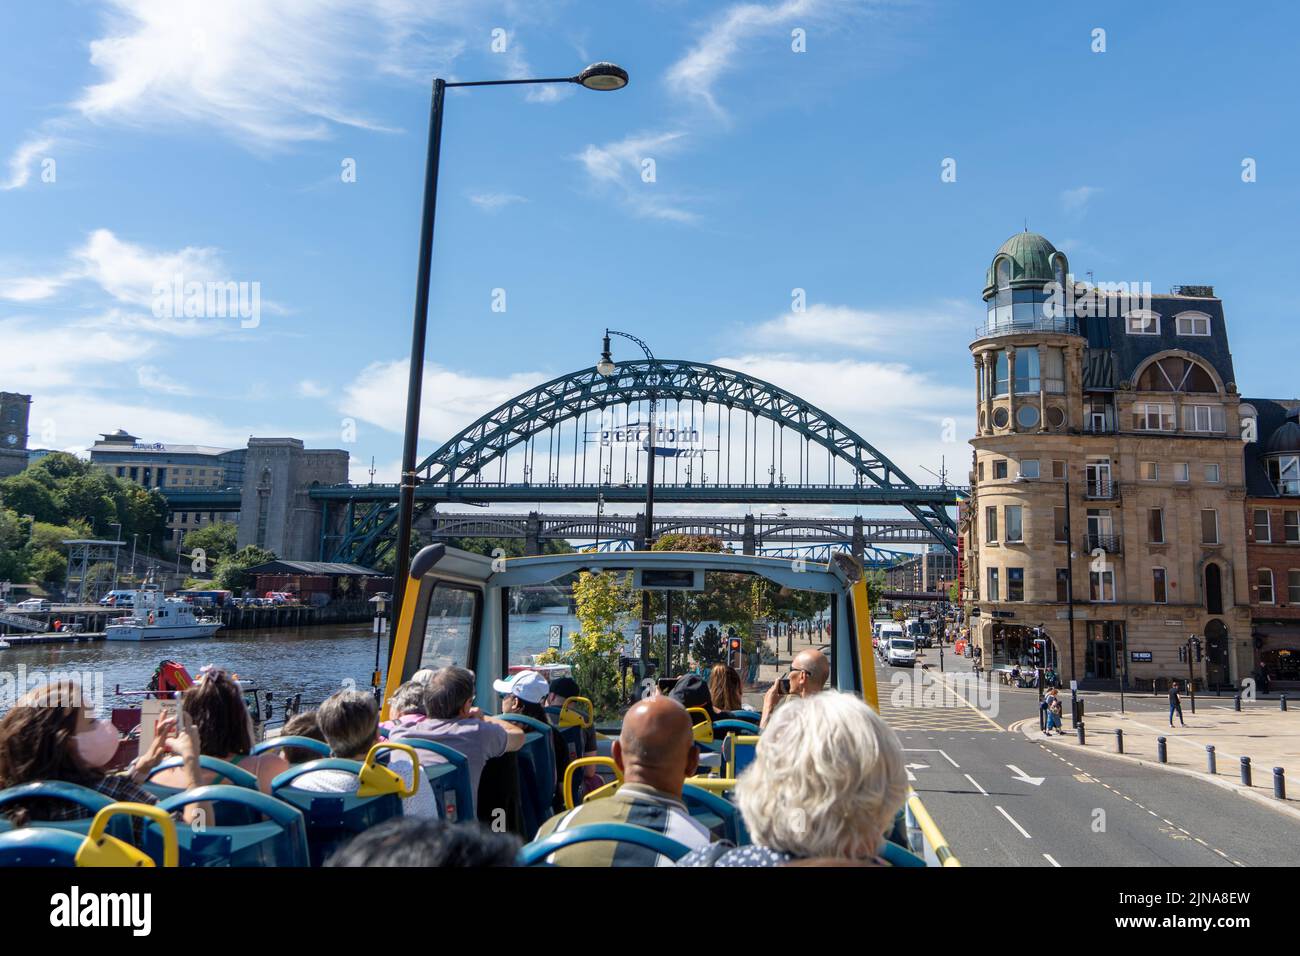 Travelling around the city of Newcastle upon Tyne, UK on the open top Toon Tour sightseeing bus, on a sunny day. Tyne Bridge Quayside view. Stock Photo